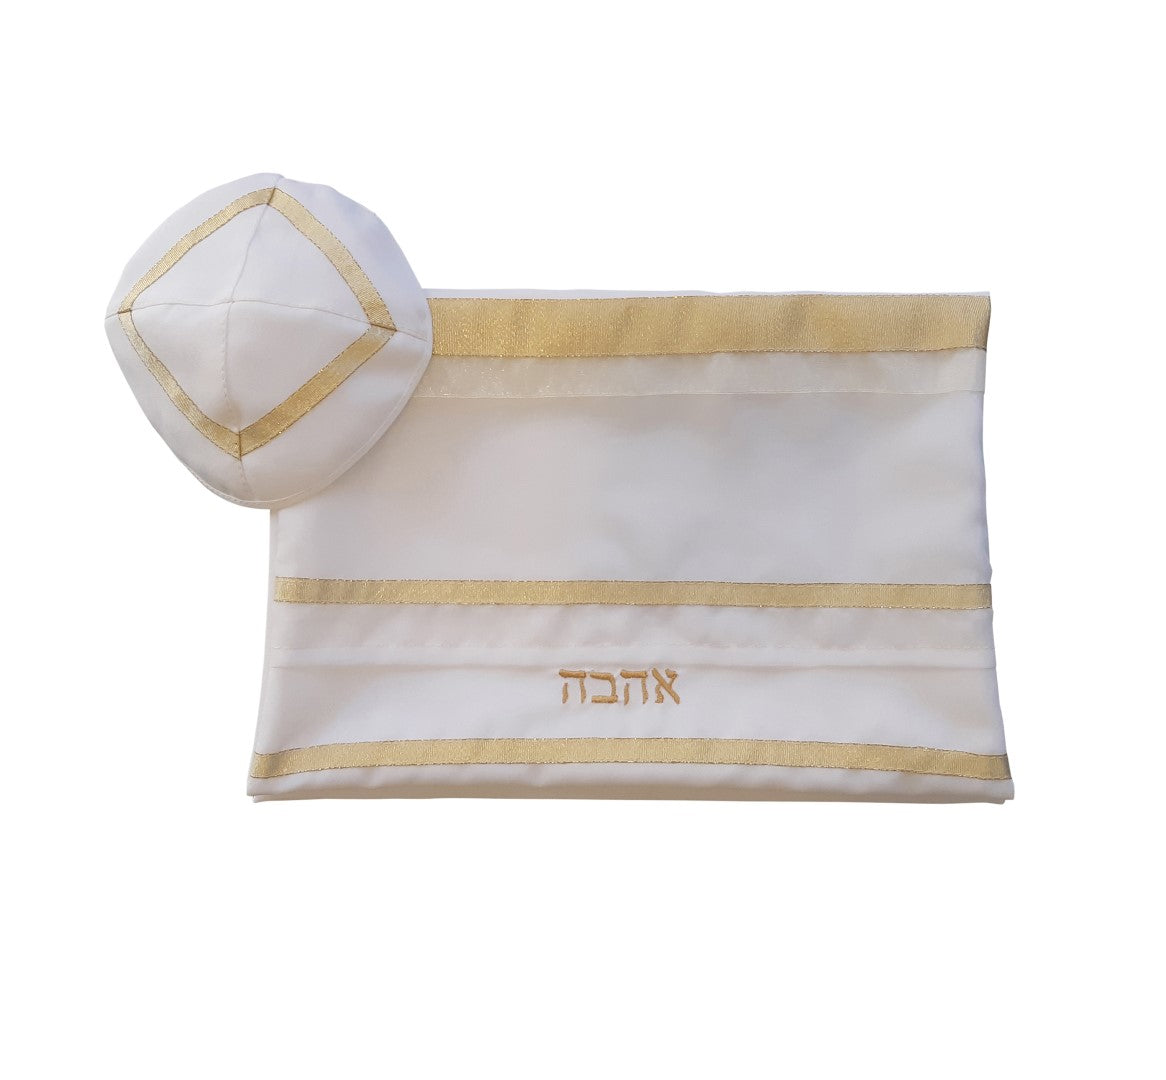 Four Mothers Tallit in Gold- Feminine tallit, Bat Mitzvah Tallit, Tallit for Women, Women's Tallit Prayer Shawl personalized